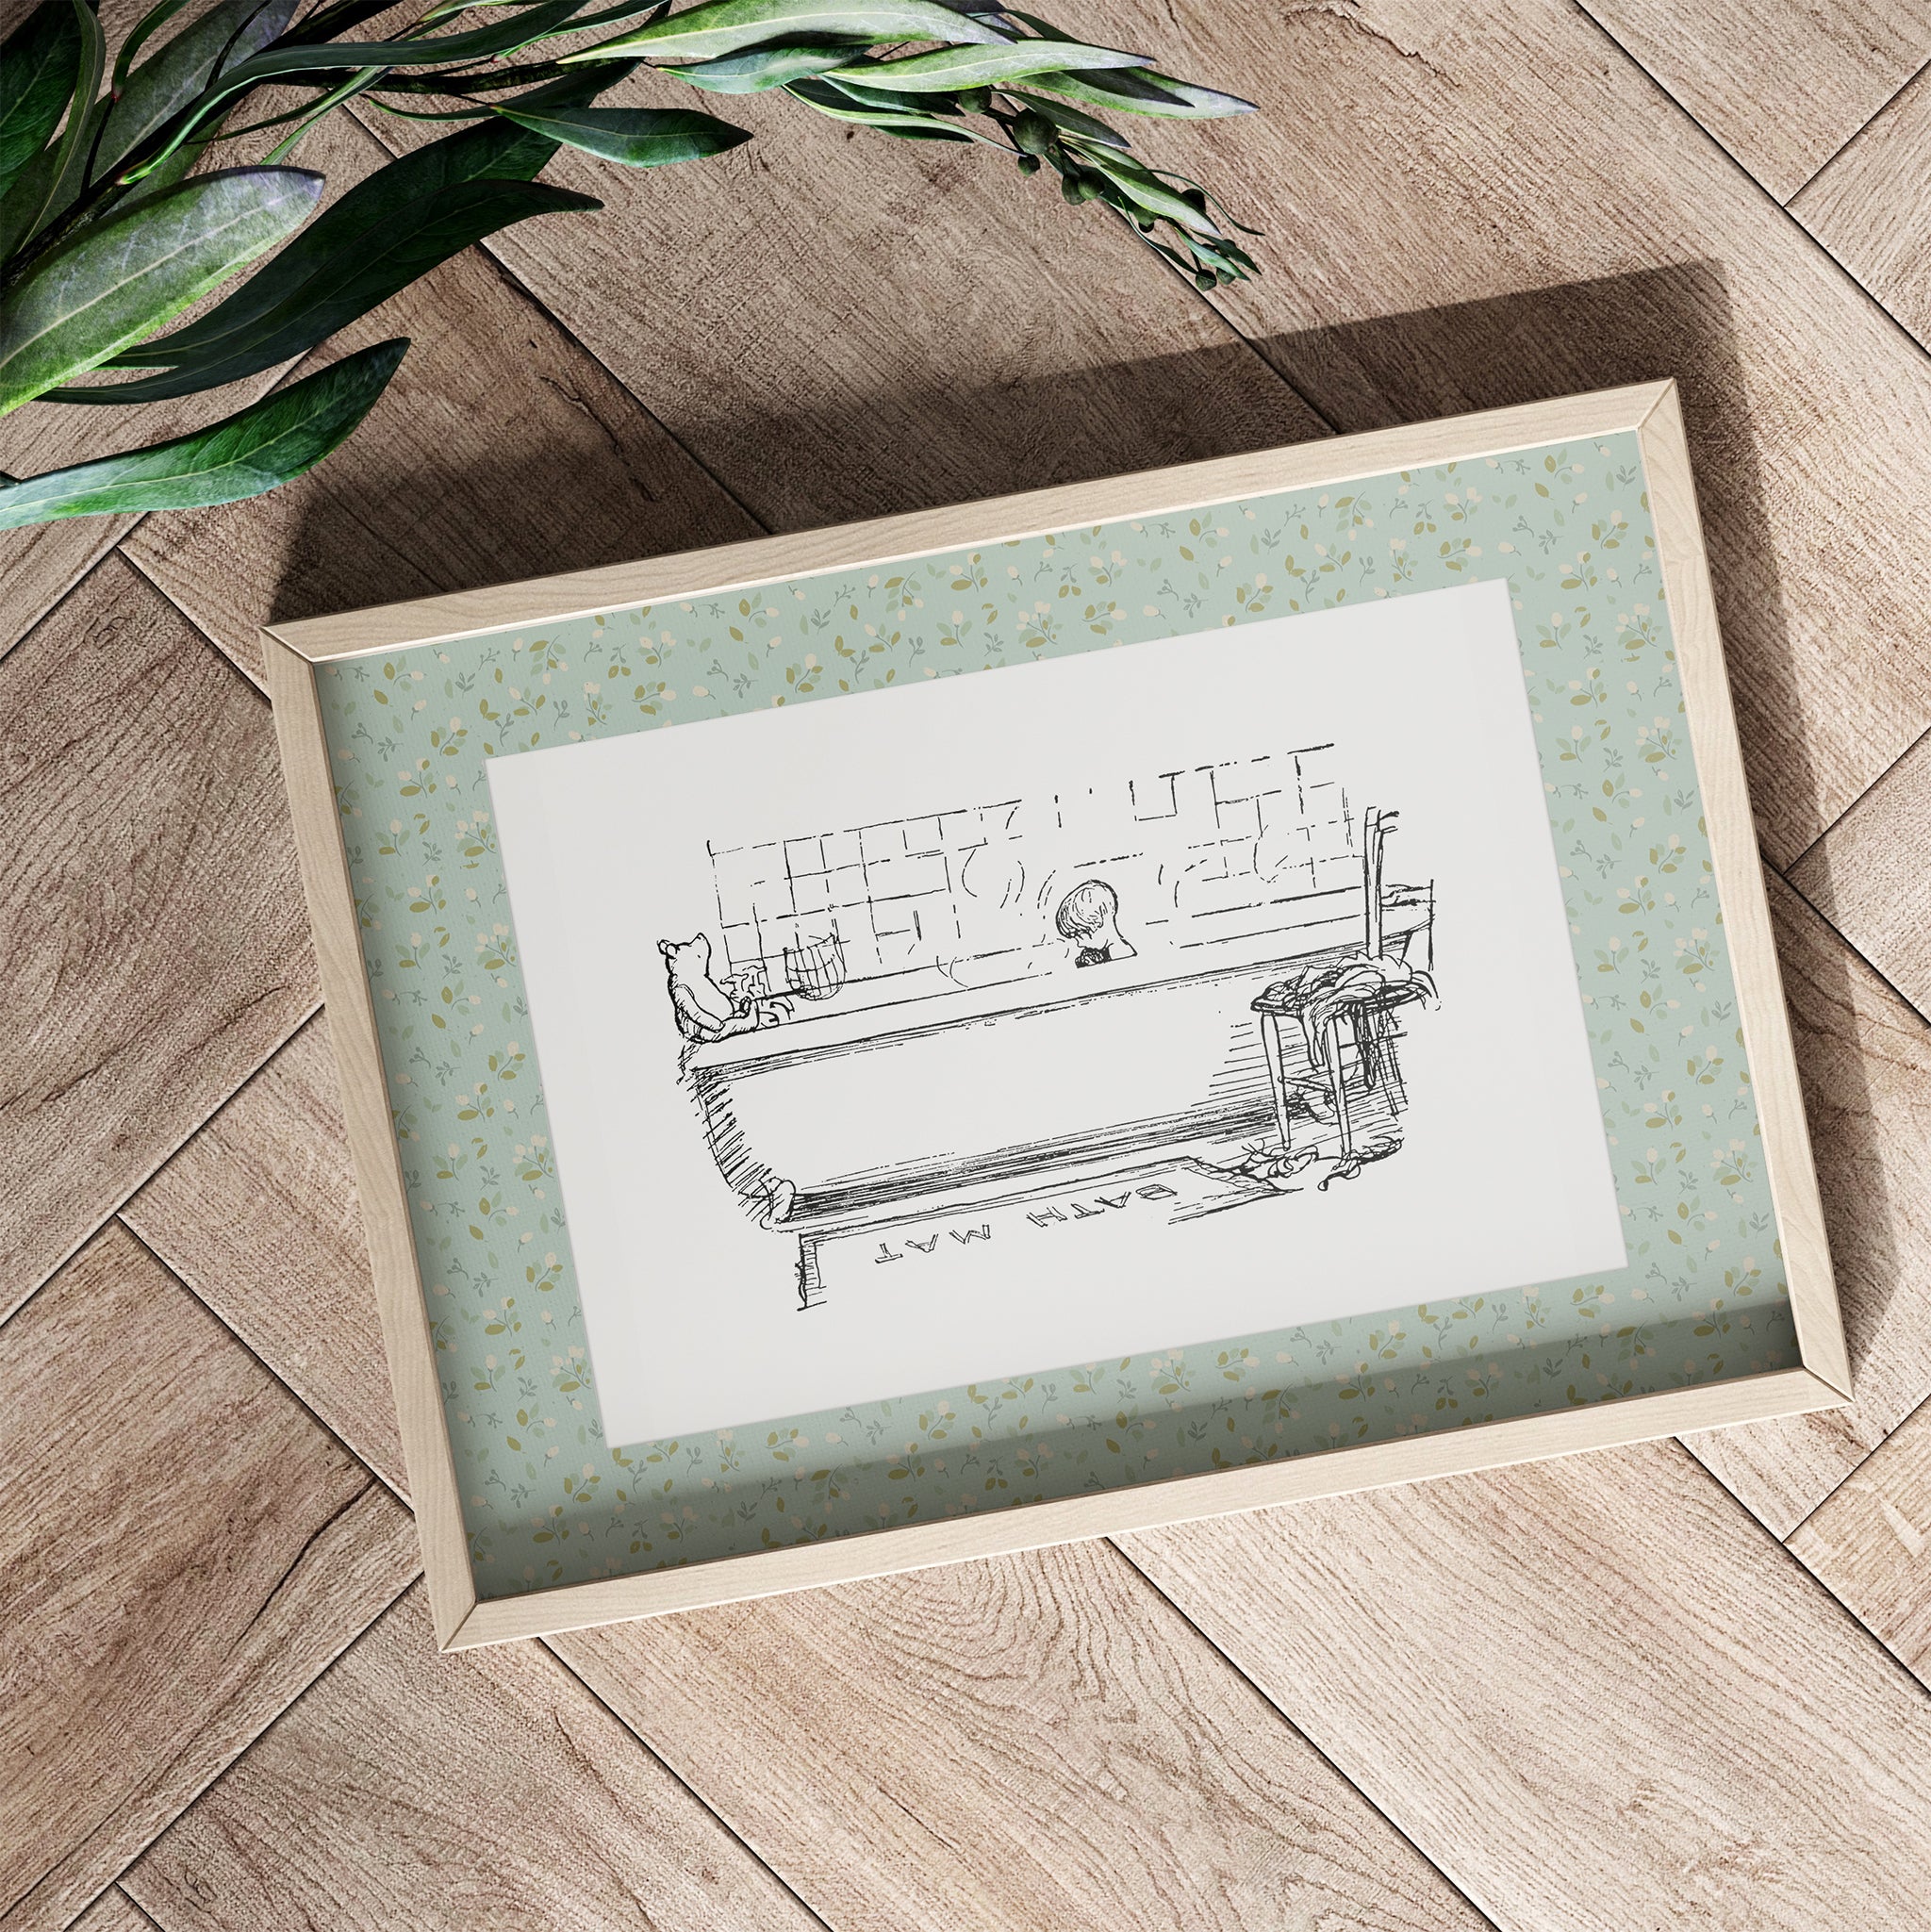 A children's bathroom print of Winnie-the-Pooh and Christopher Robin with a sage green patterned border